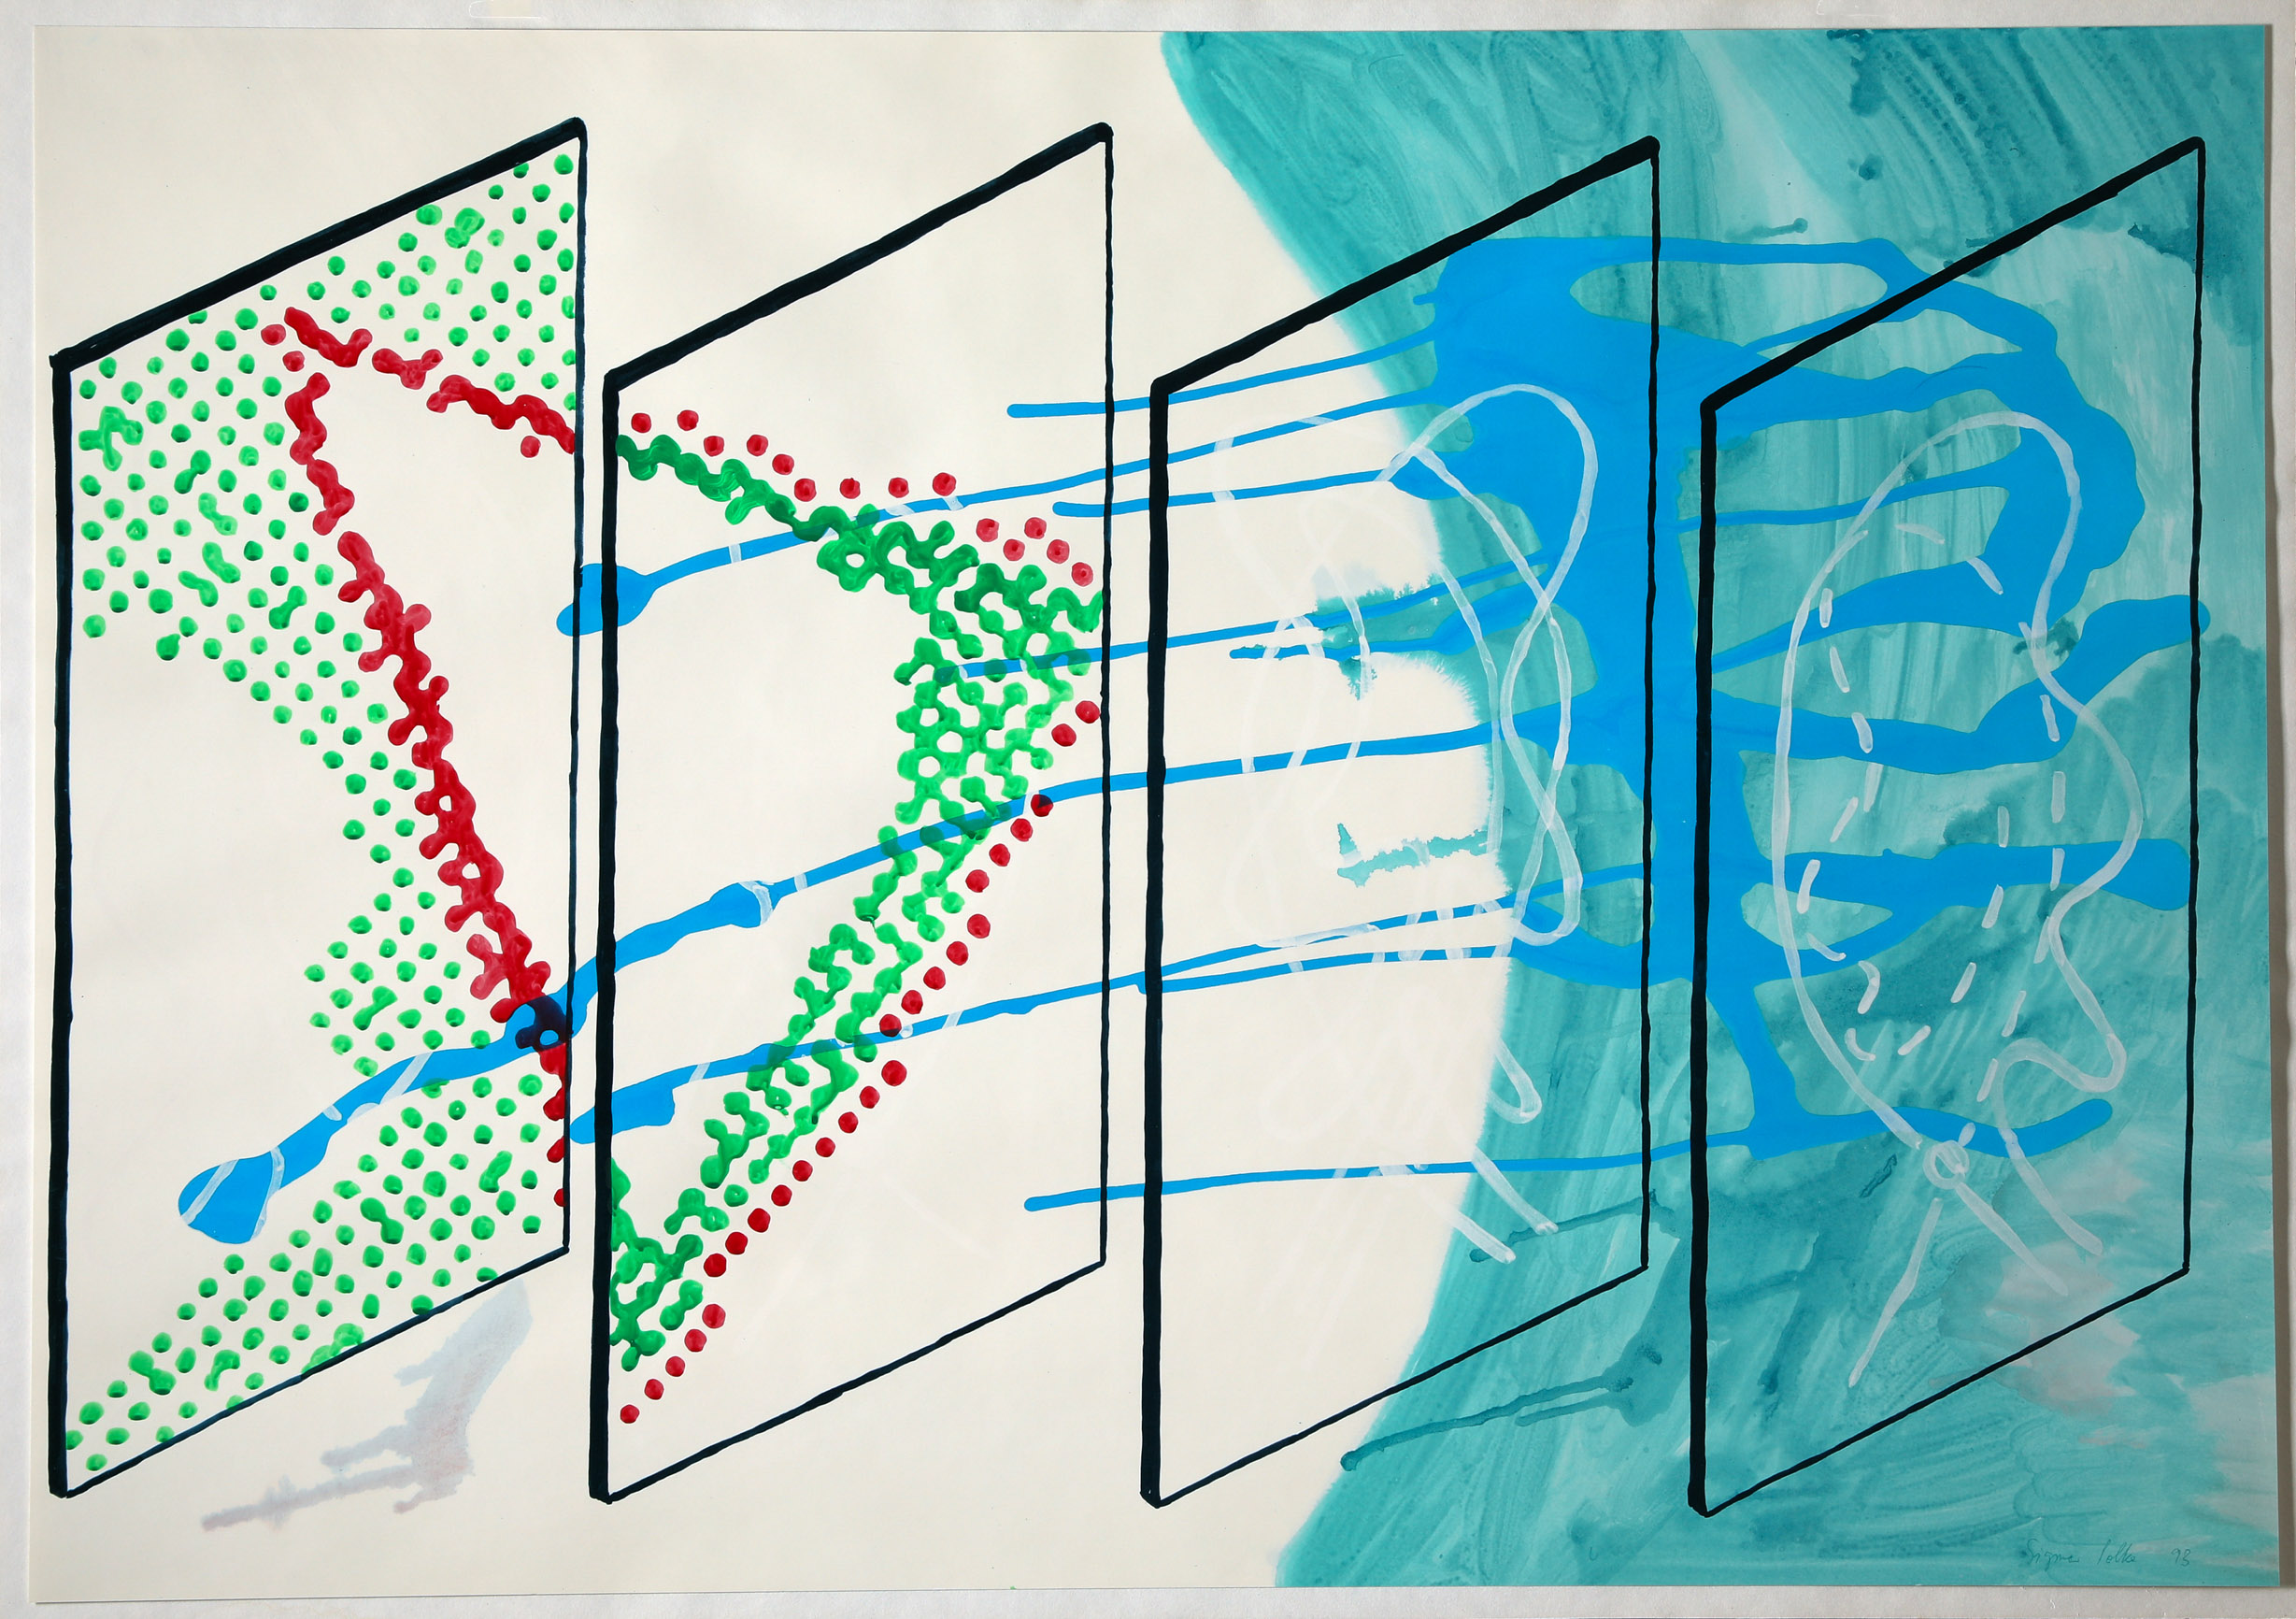 Sigmar Polke*, Unique, 1993, overpainting on Offset/ Mönchengladbach 1992, signed - Image 2 of 6